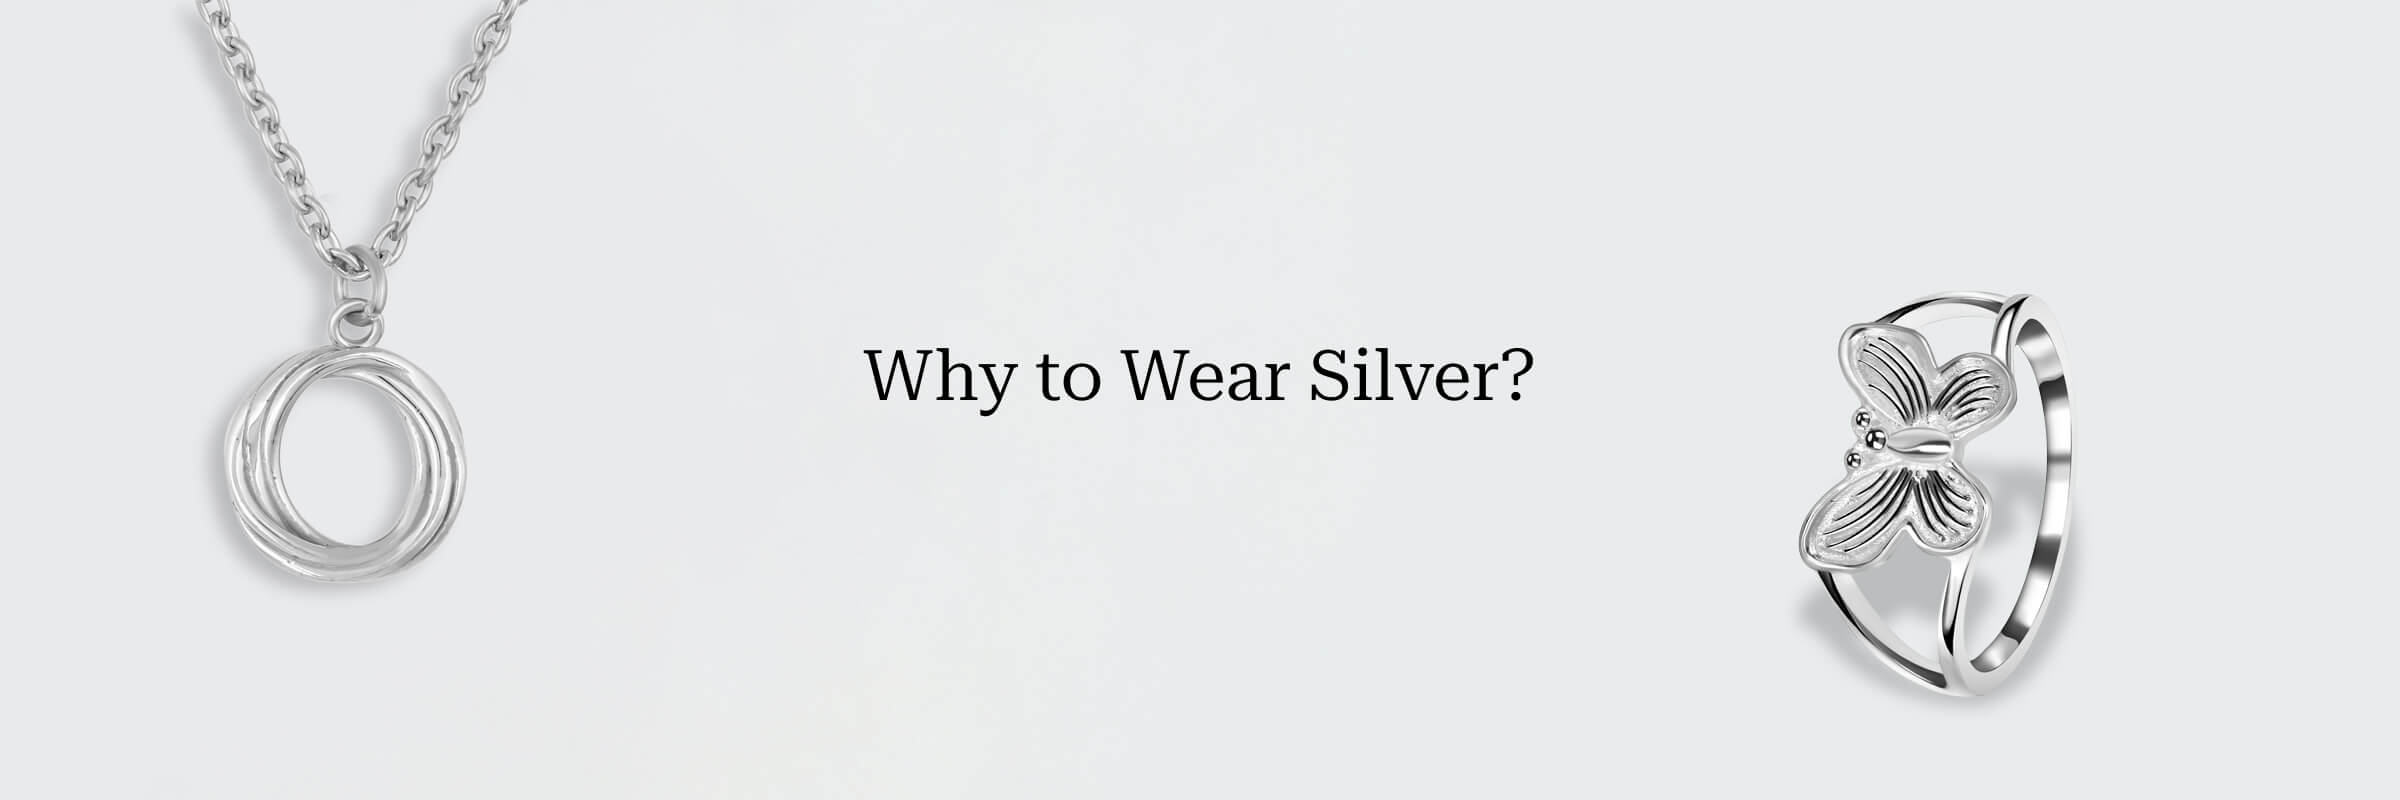 What is the meaning of silver thumb rings? | eHow UK